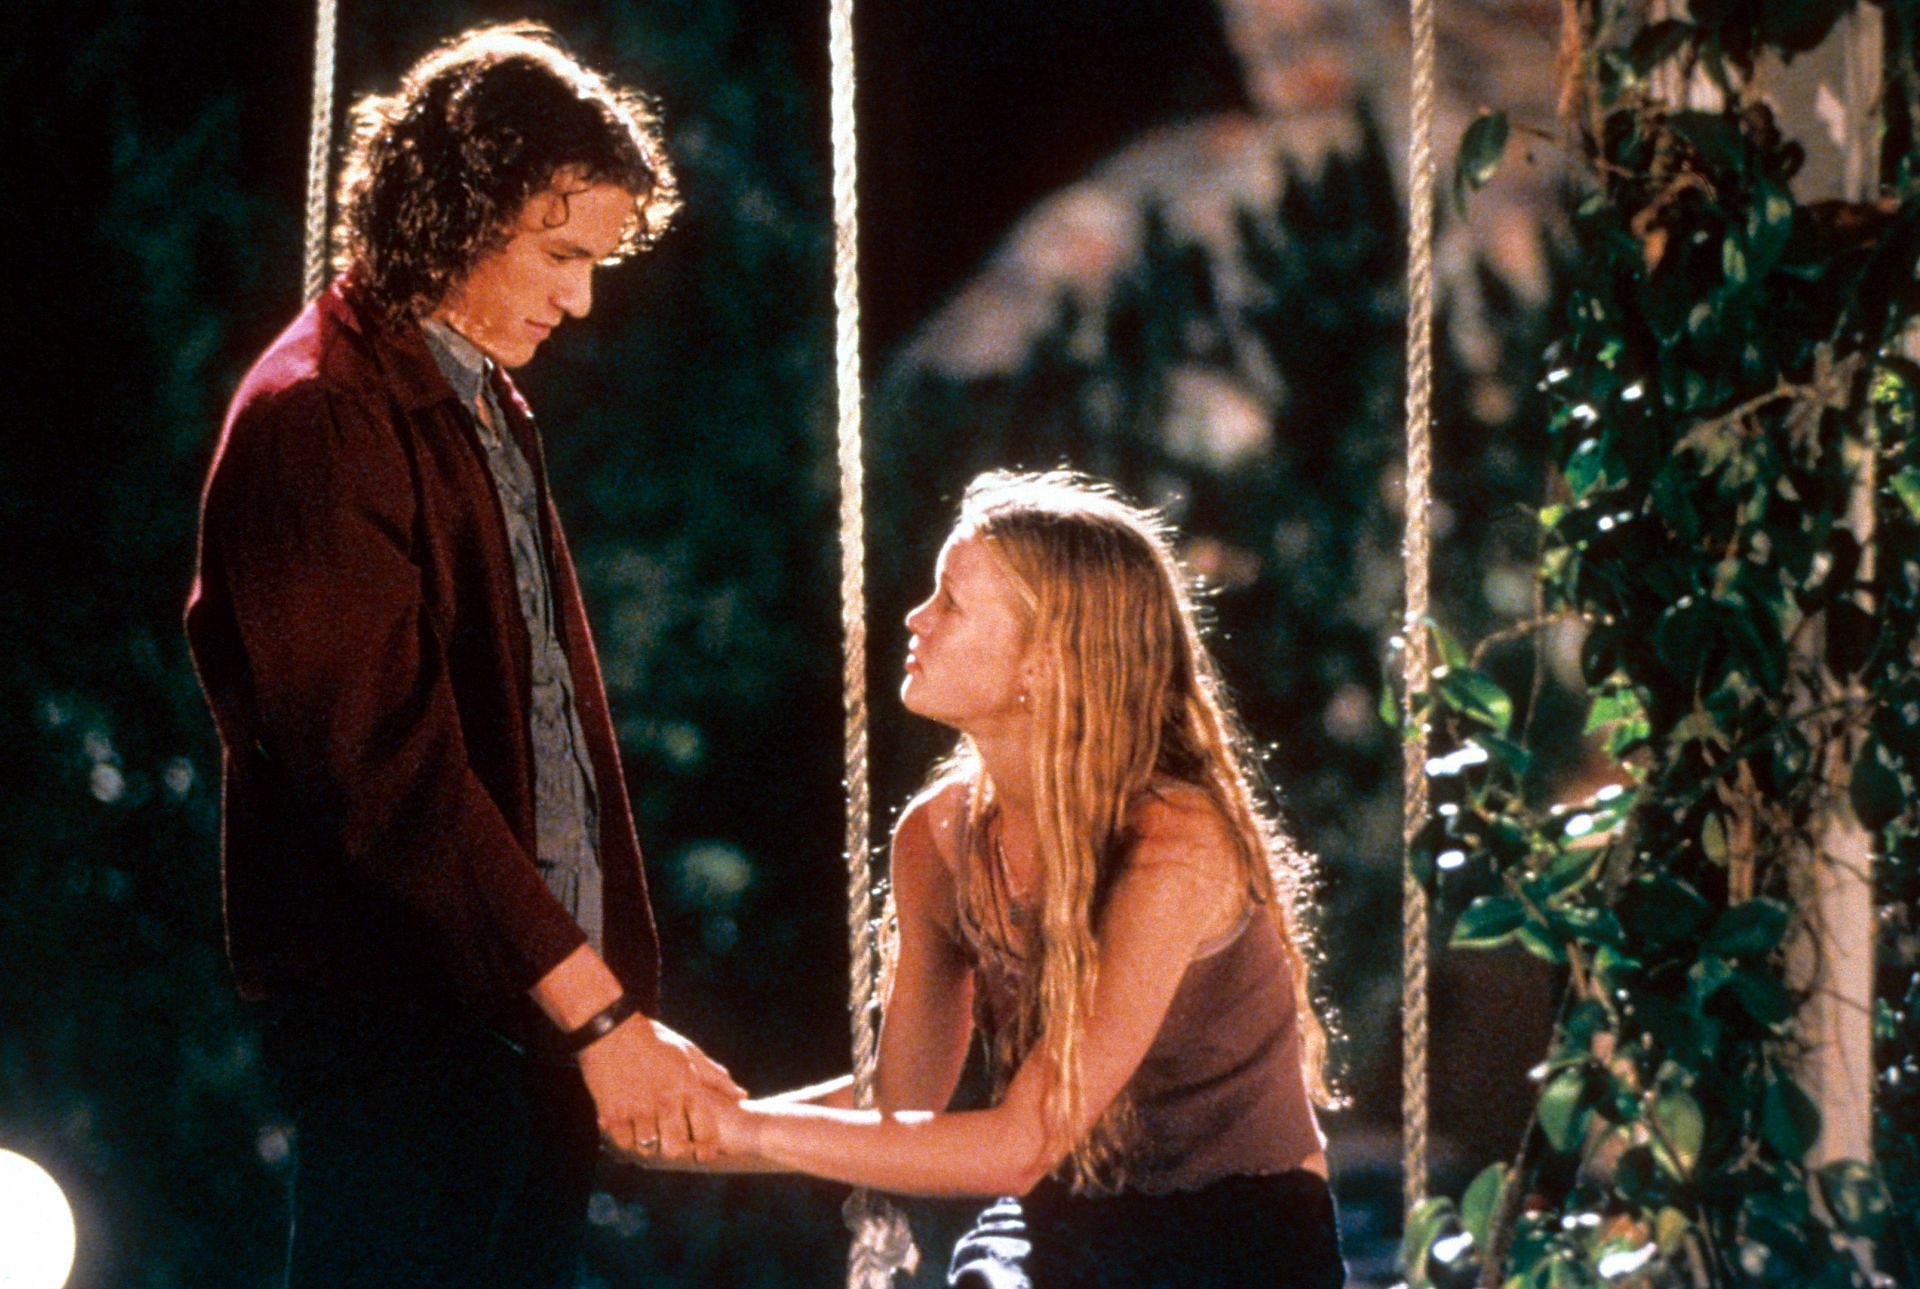 A still from 10 Things I Hate About You (image via Walt Disney Studios Motion Pictures)